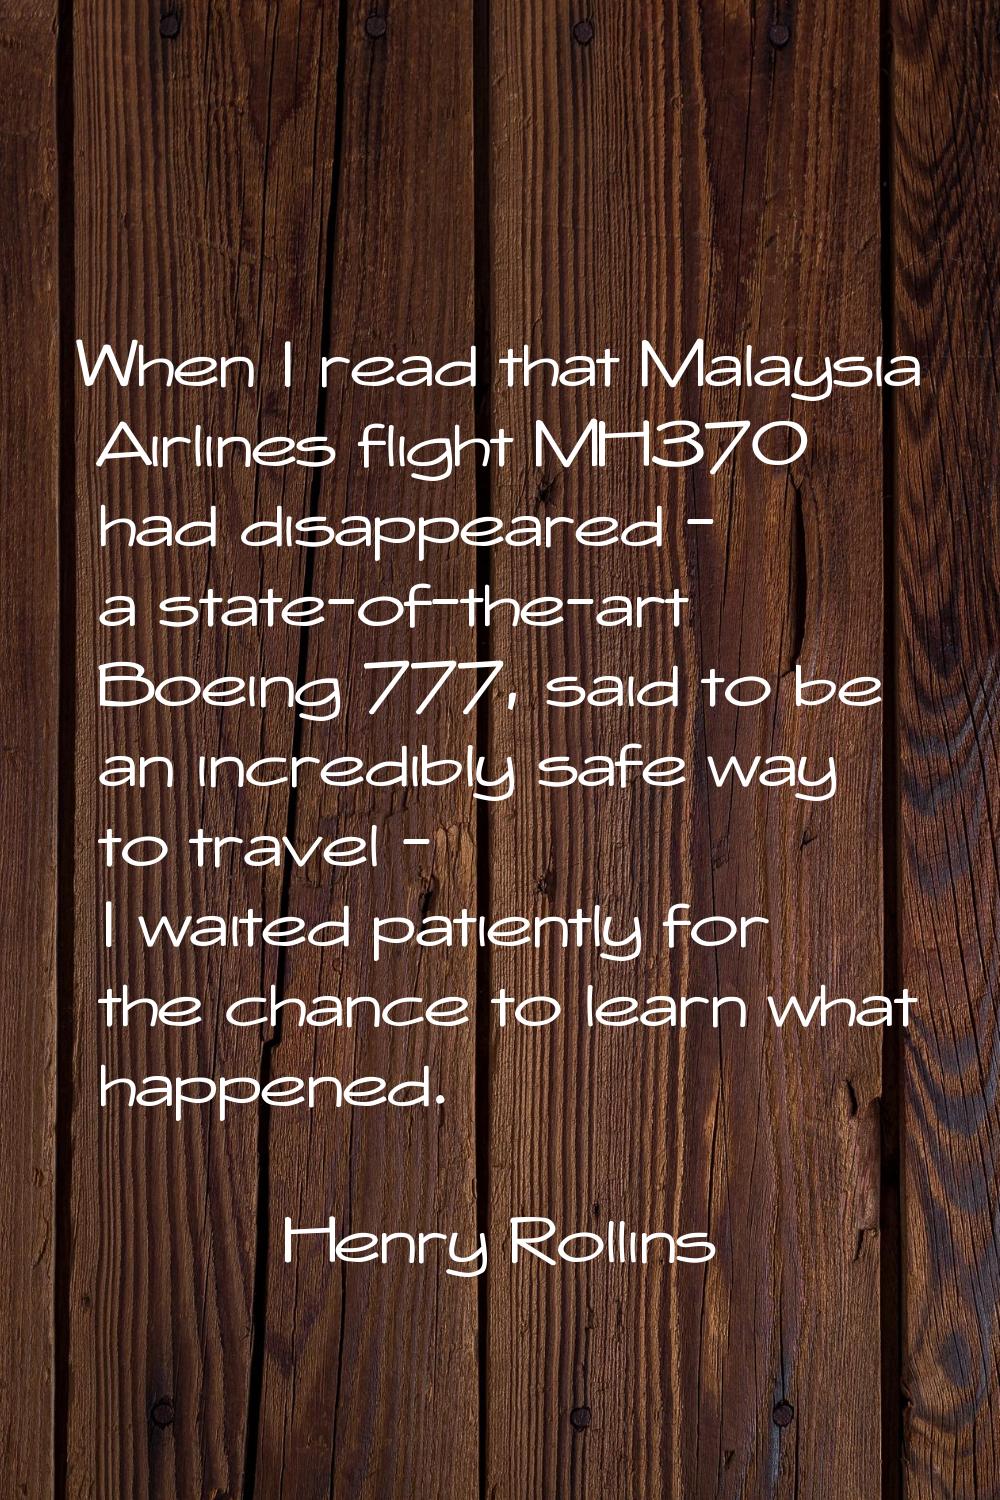 When I read that Malaysia Airlines flight MH370 had disappeared - a state-of-the-art Boeing 777, sa